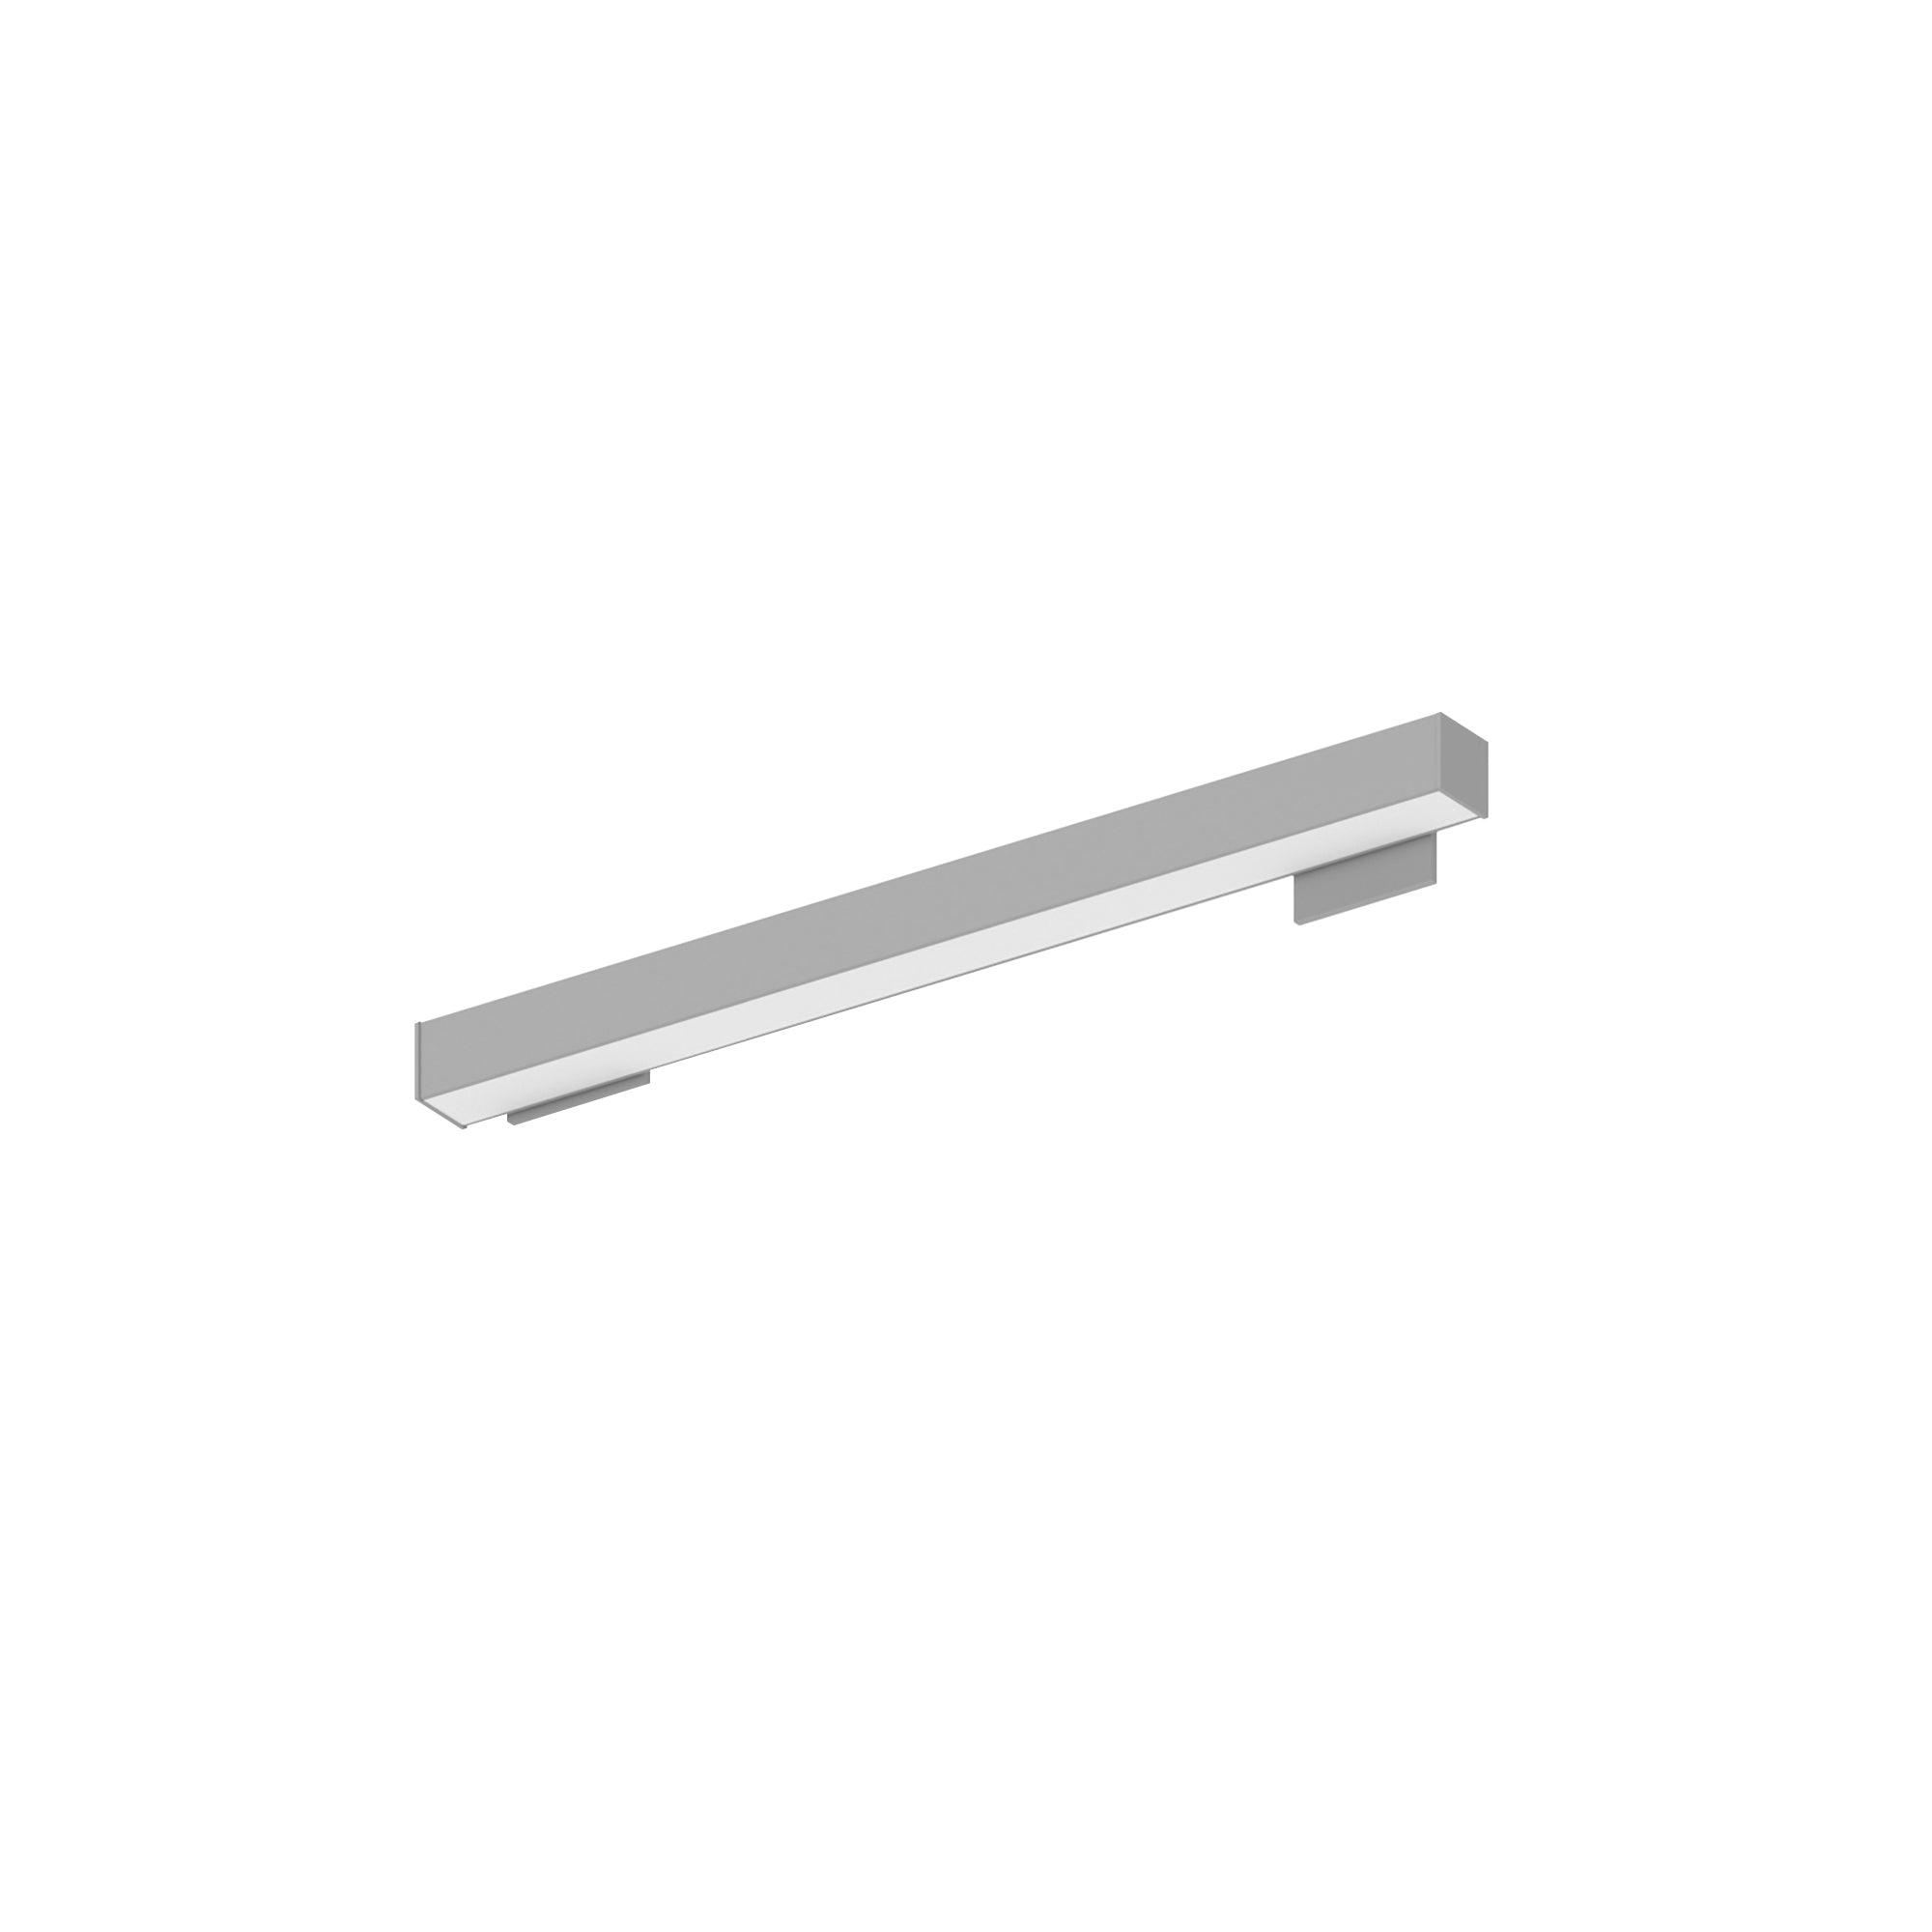 Nora Lighting NWLIN-21035A/L2-R4 - Linear - 2' L-Line LED Wall Mount Linear, 2100lm / 3500K, 2 Inchx4 Inch Left Plate & 4 Inchx4 Inch Right Plate, Aluminum Finish